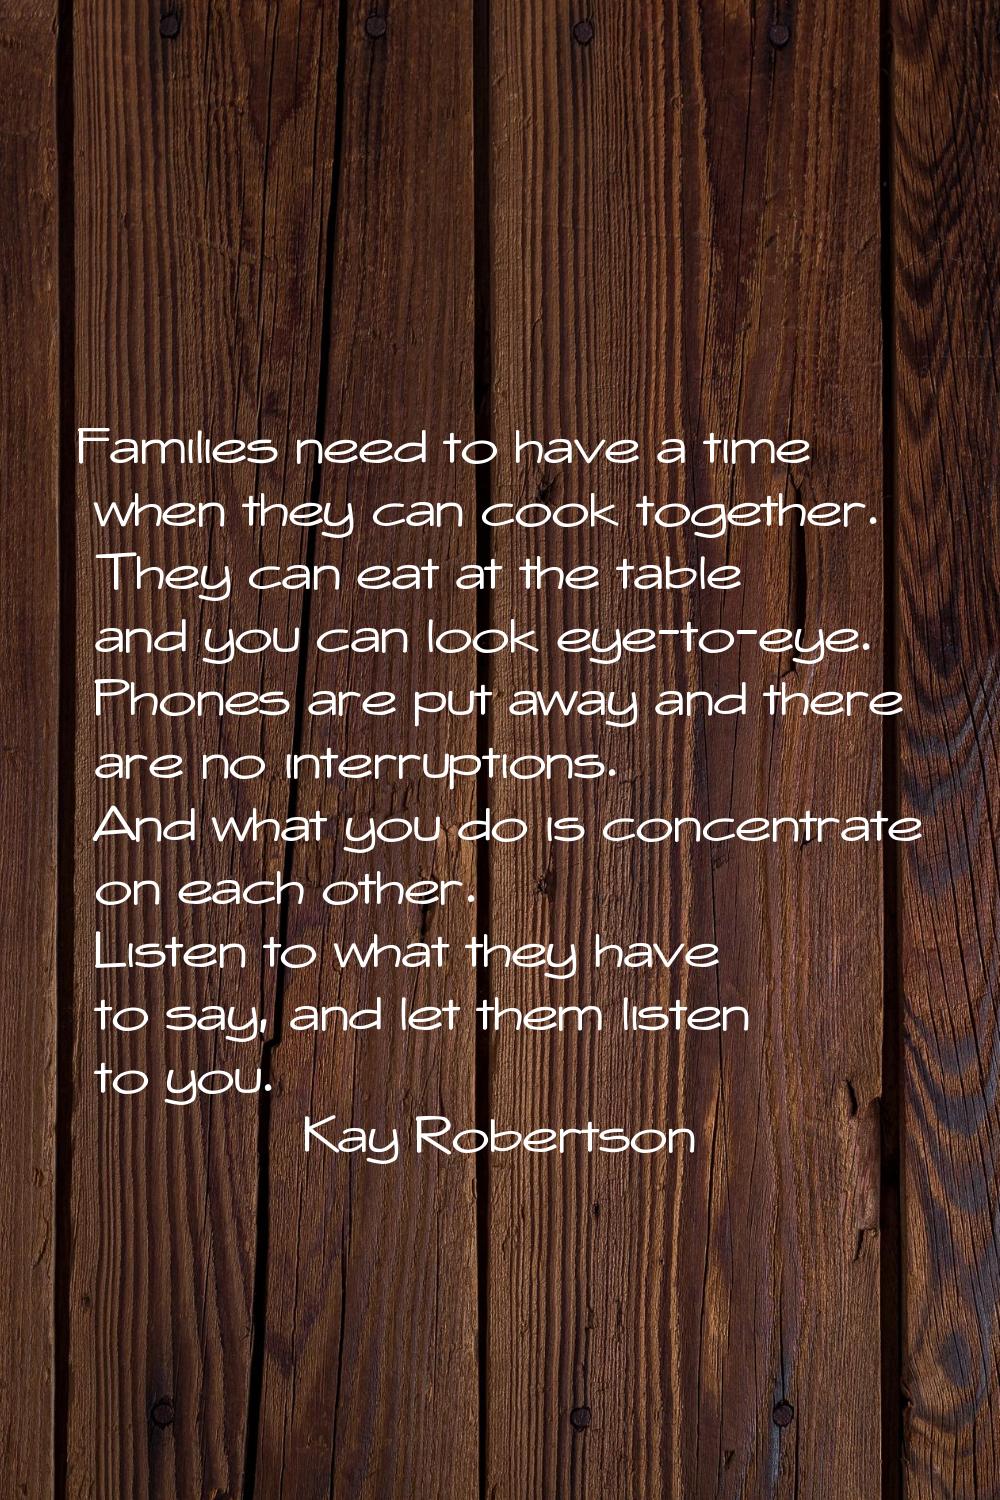 Families need to have a time when they can cook together. They can eat at the table and you can loo